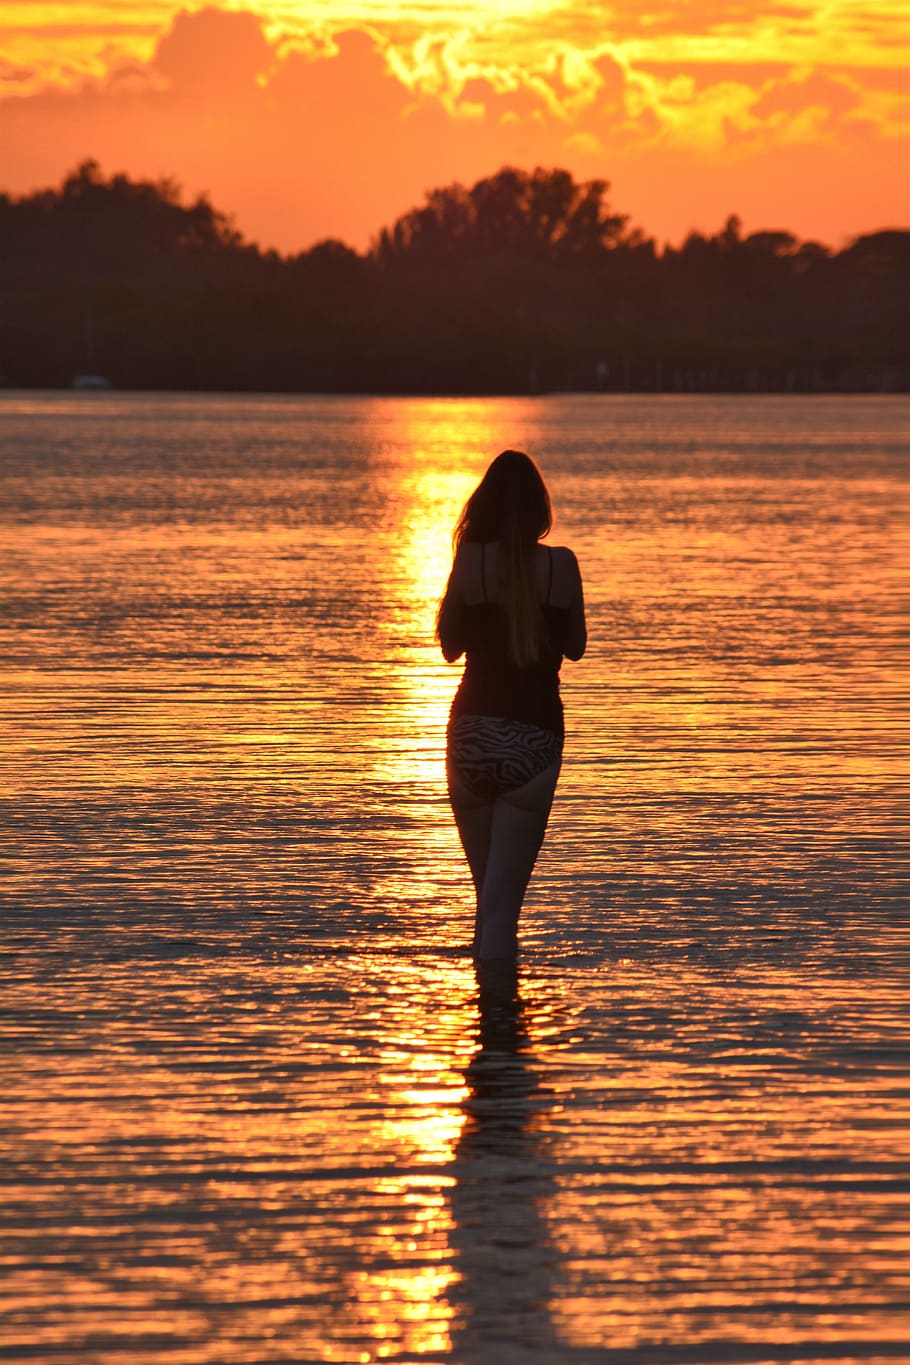 sunset, young woman, silhouette, beach, water, orange color, sky, beauty in nature, scenics - nature, real people